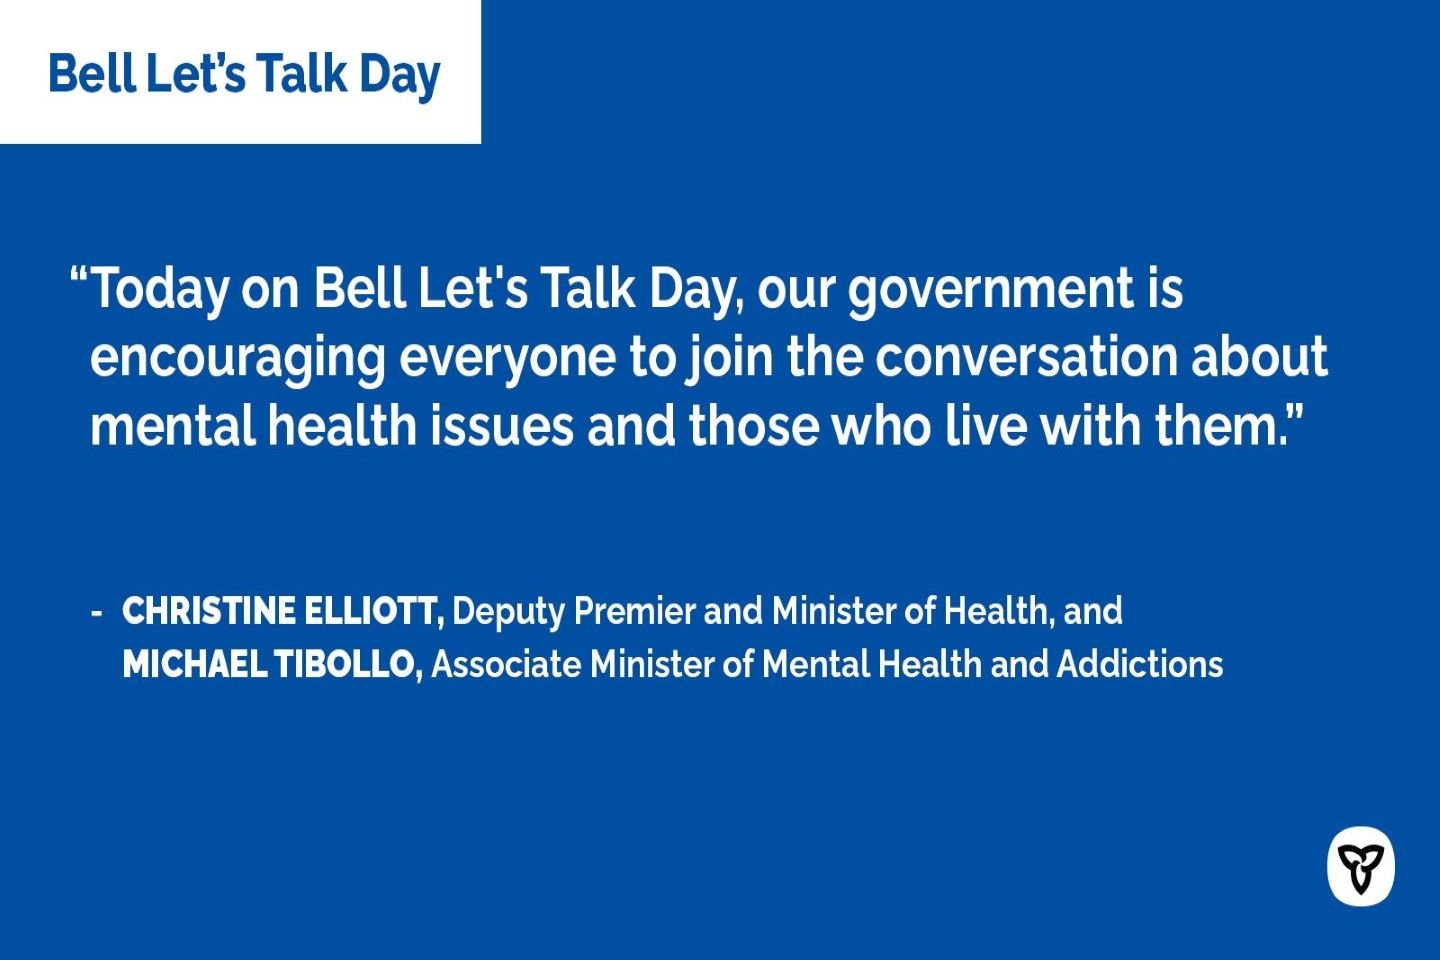 Join the Conversation on Mental Health on Bell Let's Talk Day